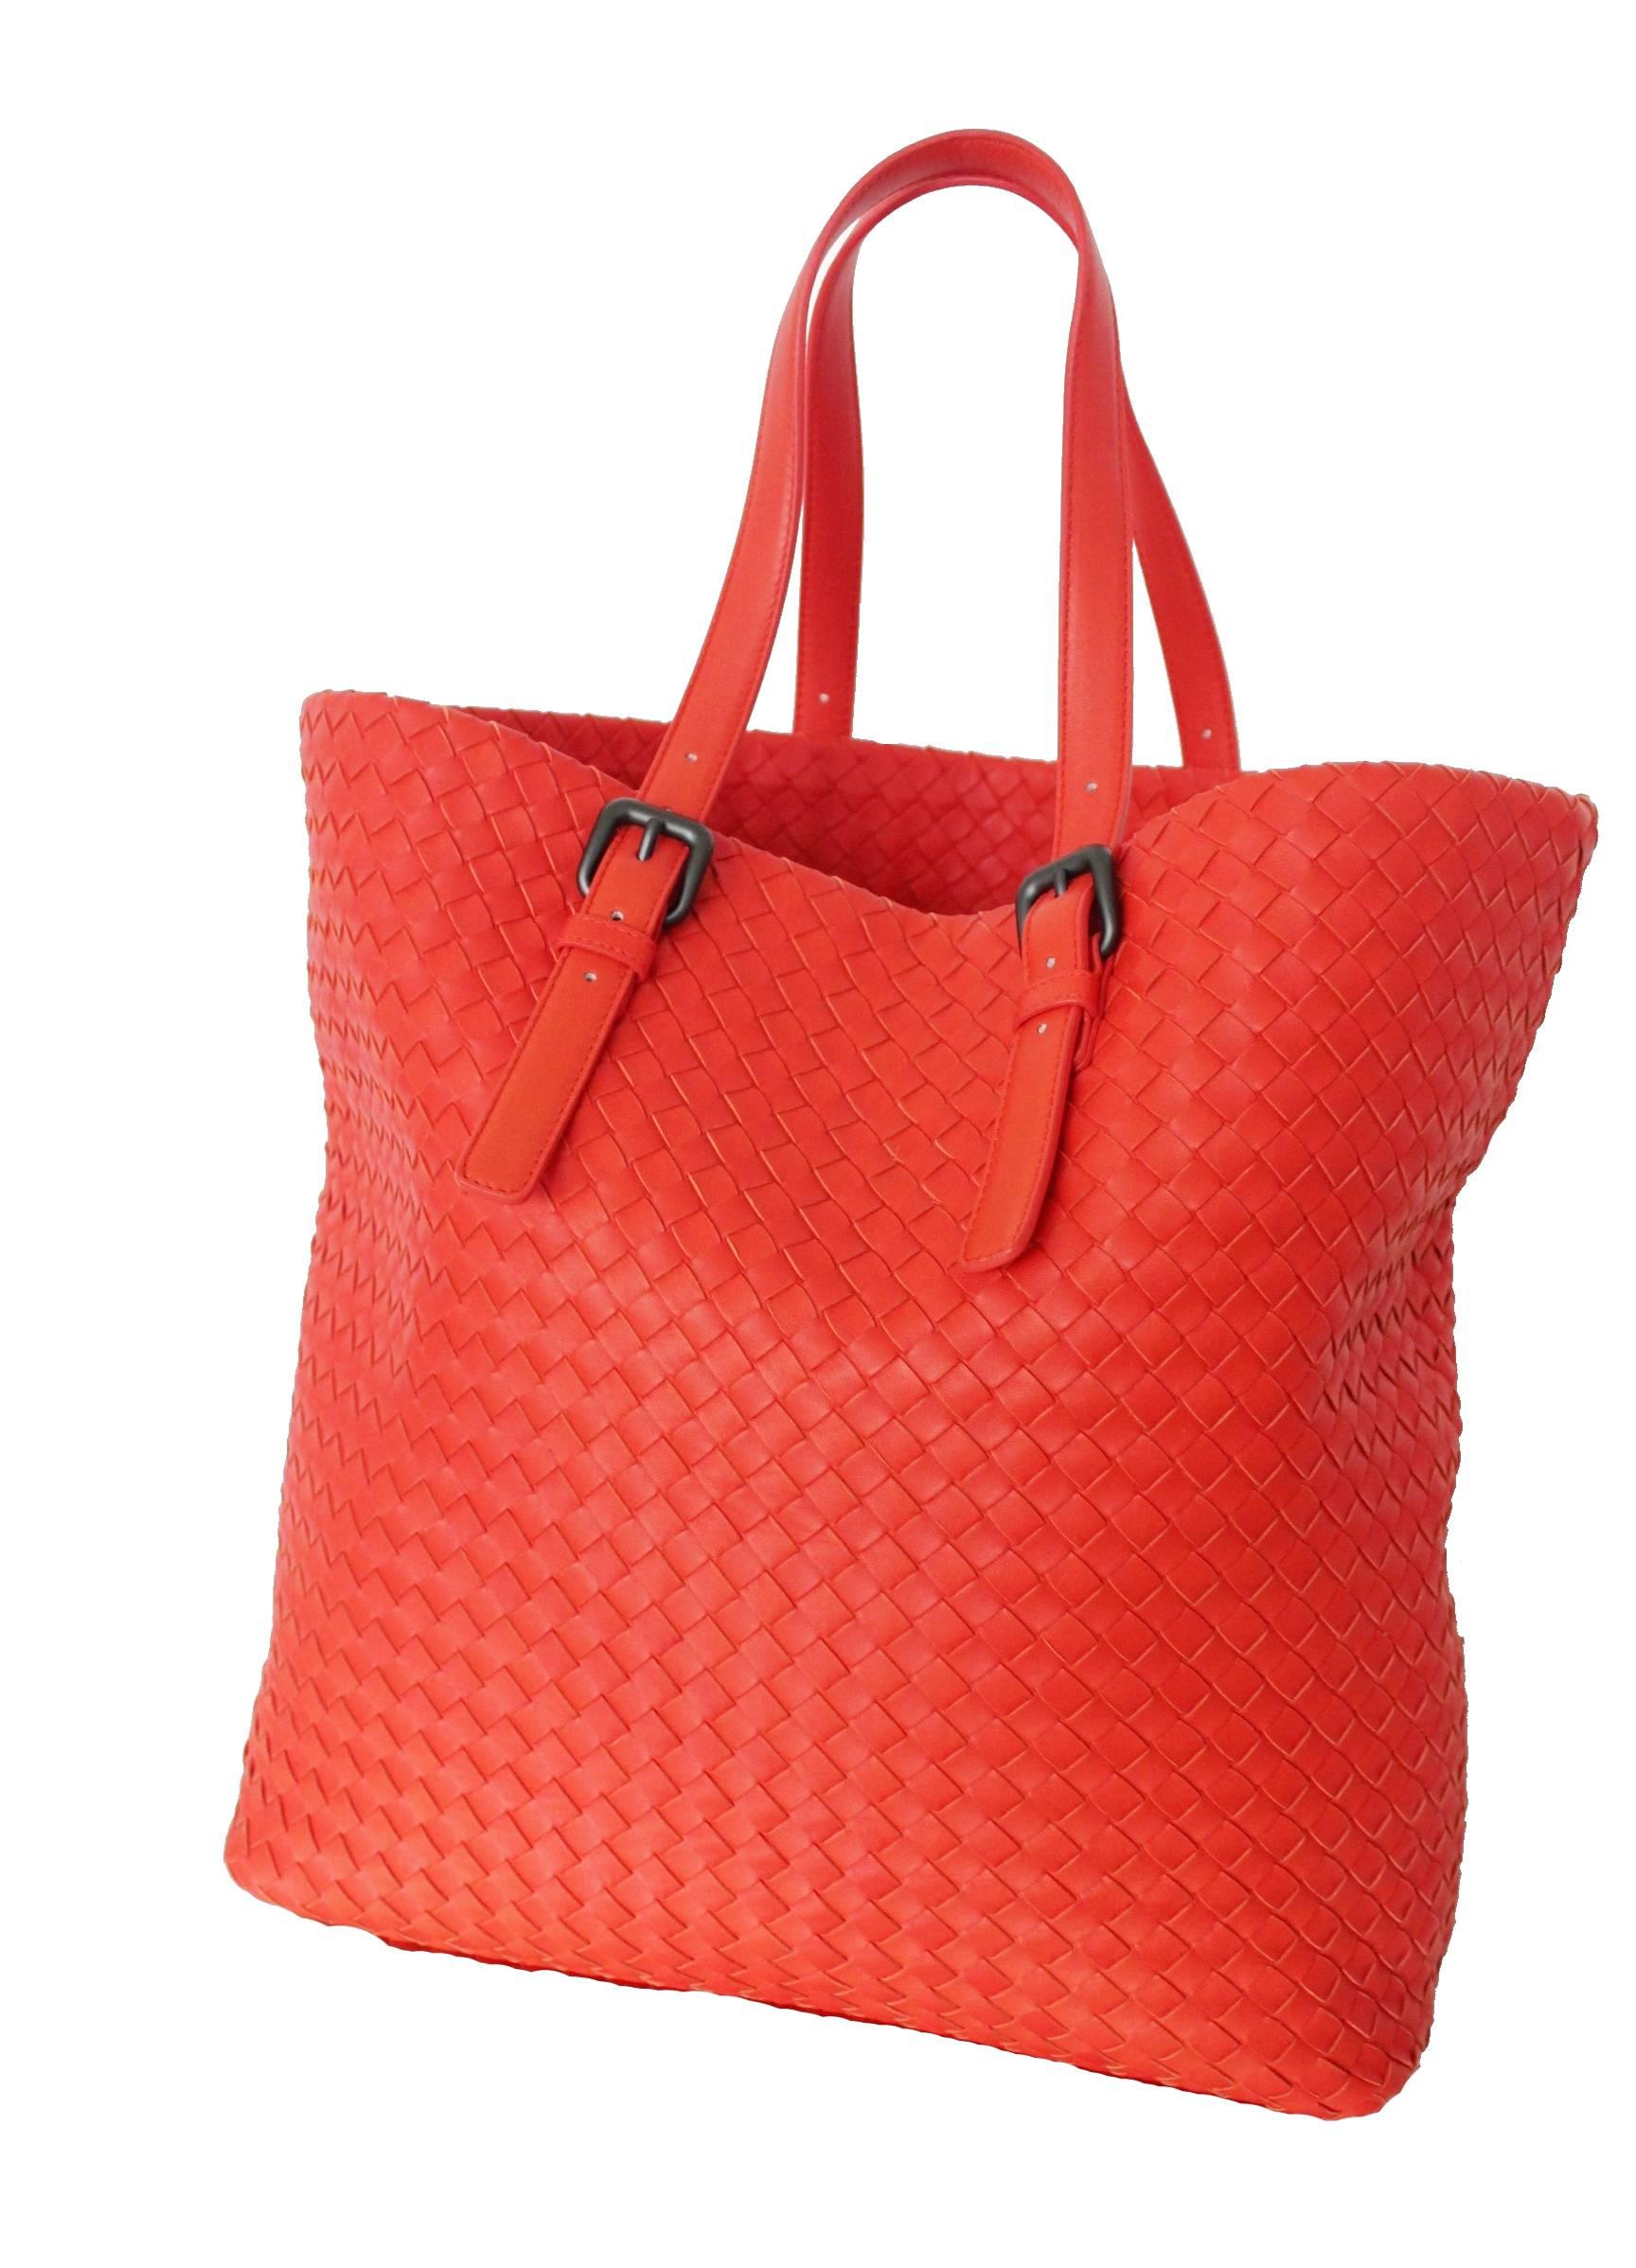 JUST GORGEOUS!
BRAND NEW BOTTEGA VENETA INTRECCIATO NAPA TOTE SHOULDER BAG
IN THE SO HARD TO FIND ORANGE RED COLOR 
SOLD OUT EVERYWHERE


DETAILS: 

A BOTTEGA VENETA signature piece that will last you for many years
Beautiful orange red color
Huge